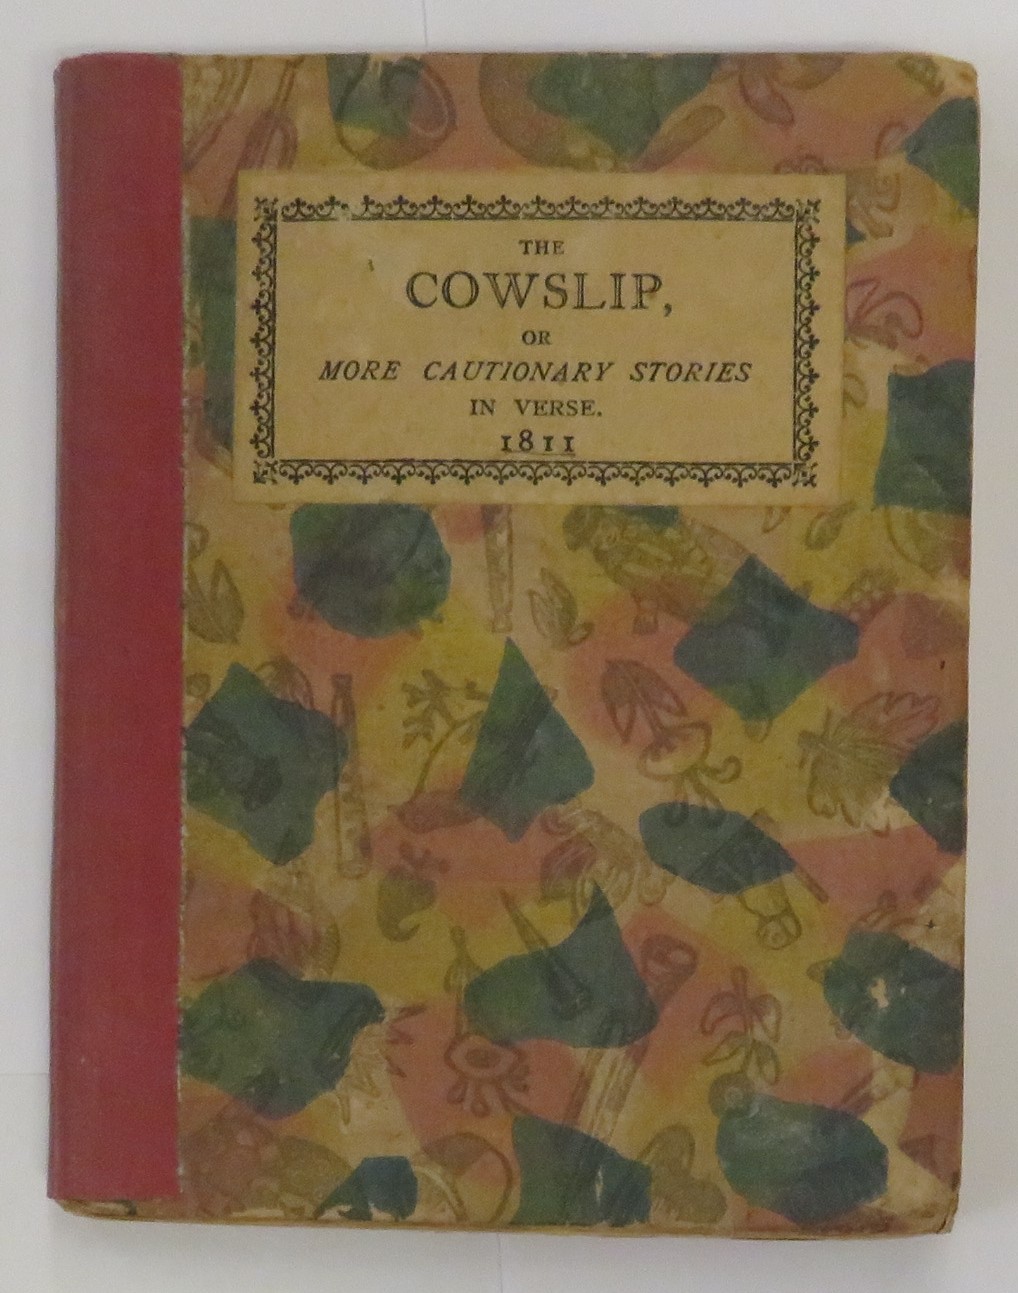 The Cowslip; Or More Cautionary Stories in Verse